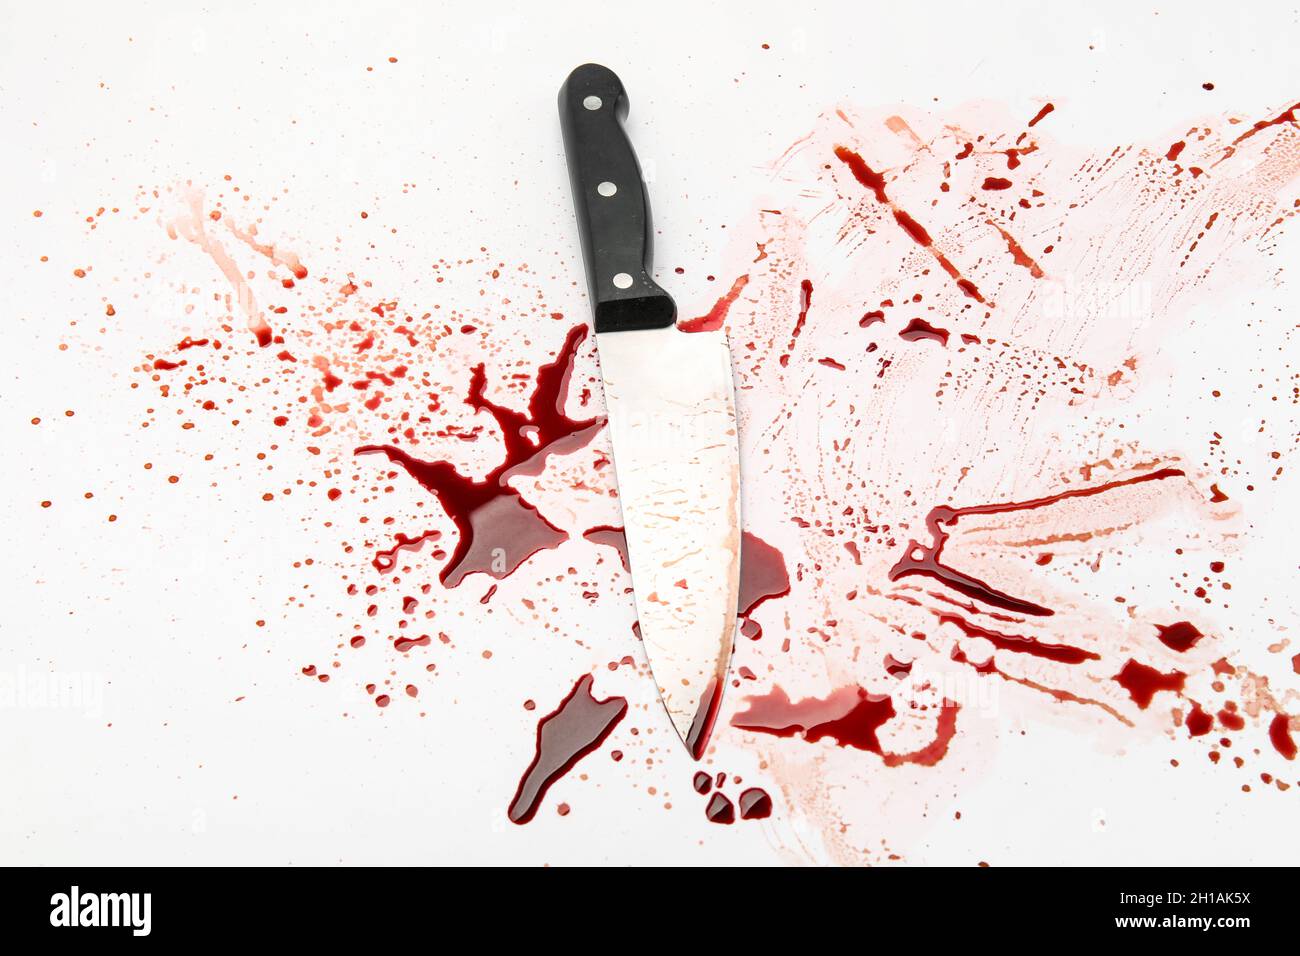 Knife with blood drops on white background Stock Photo